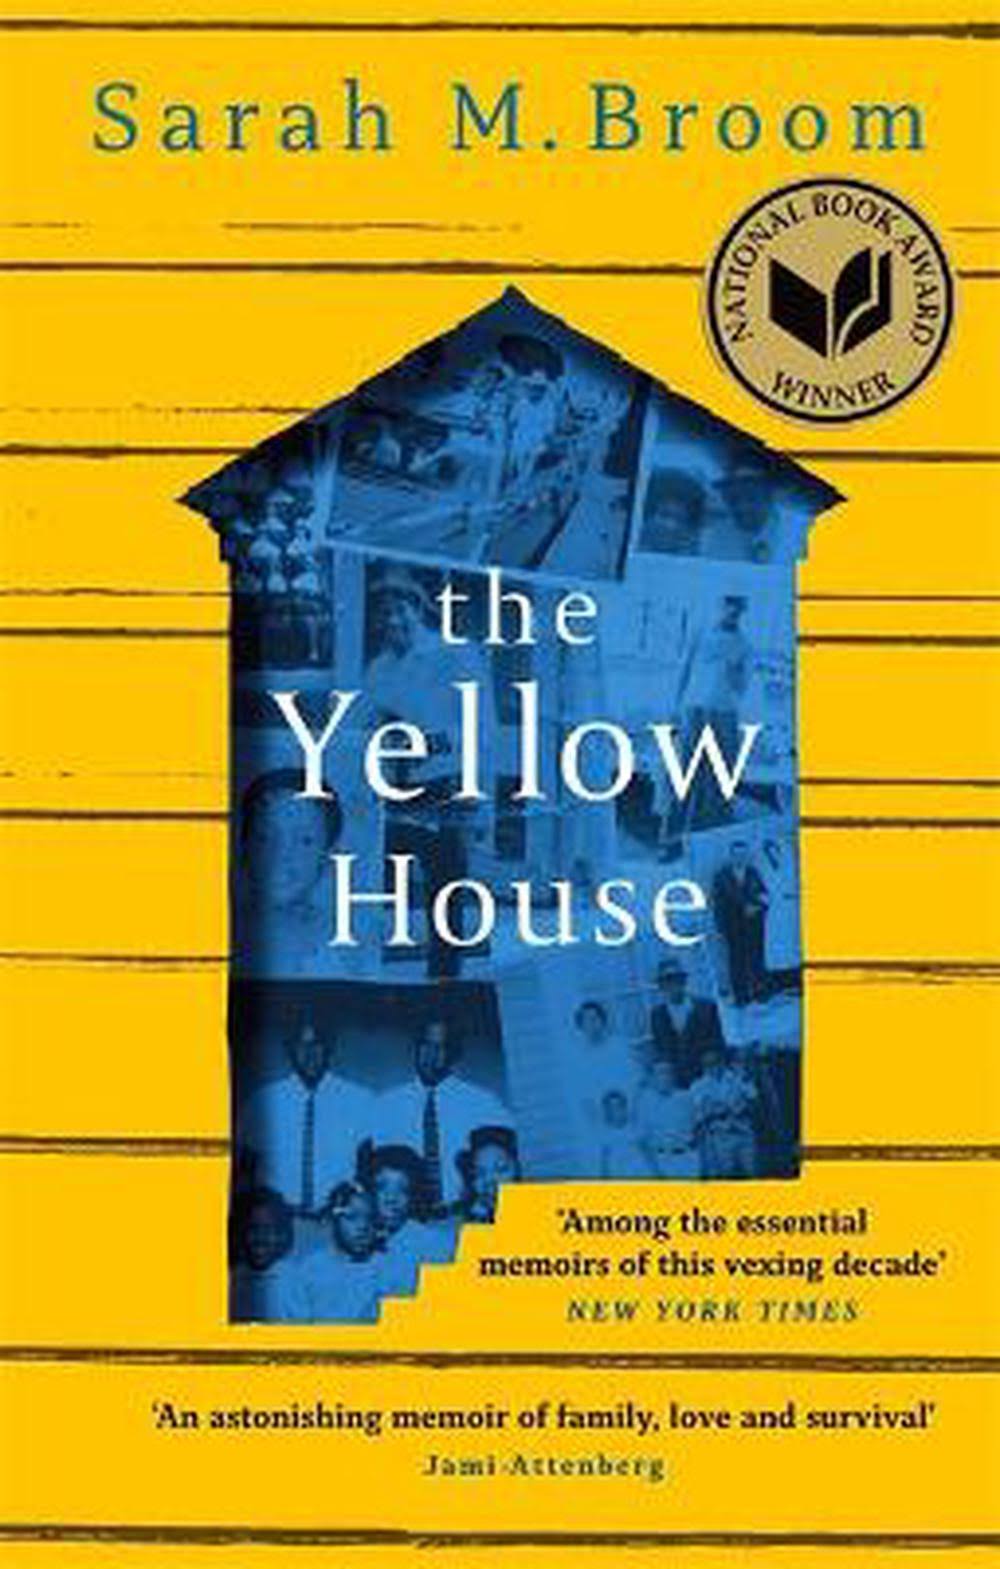 The Yellow House [Book]